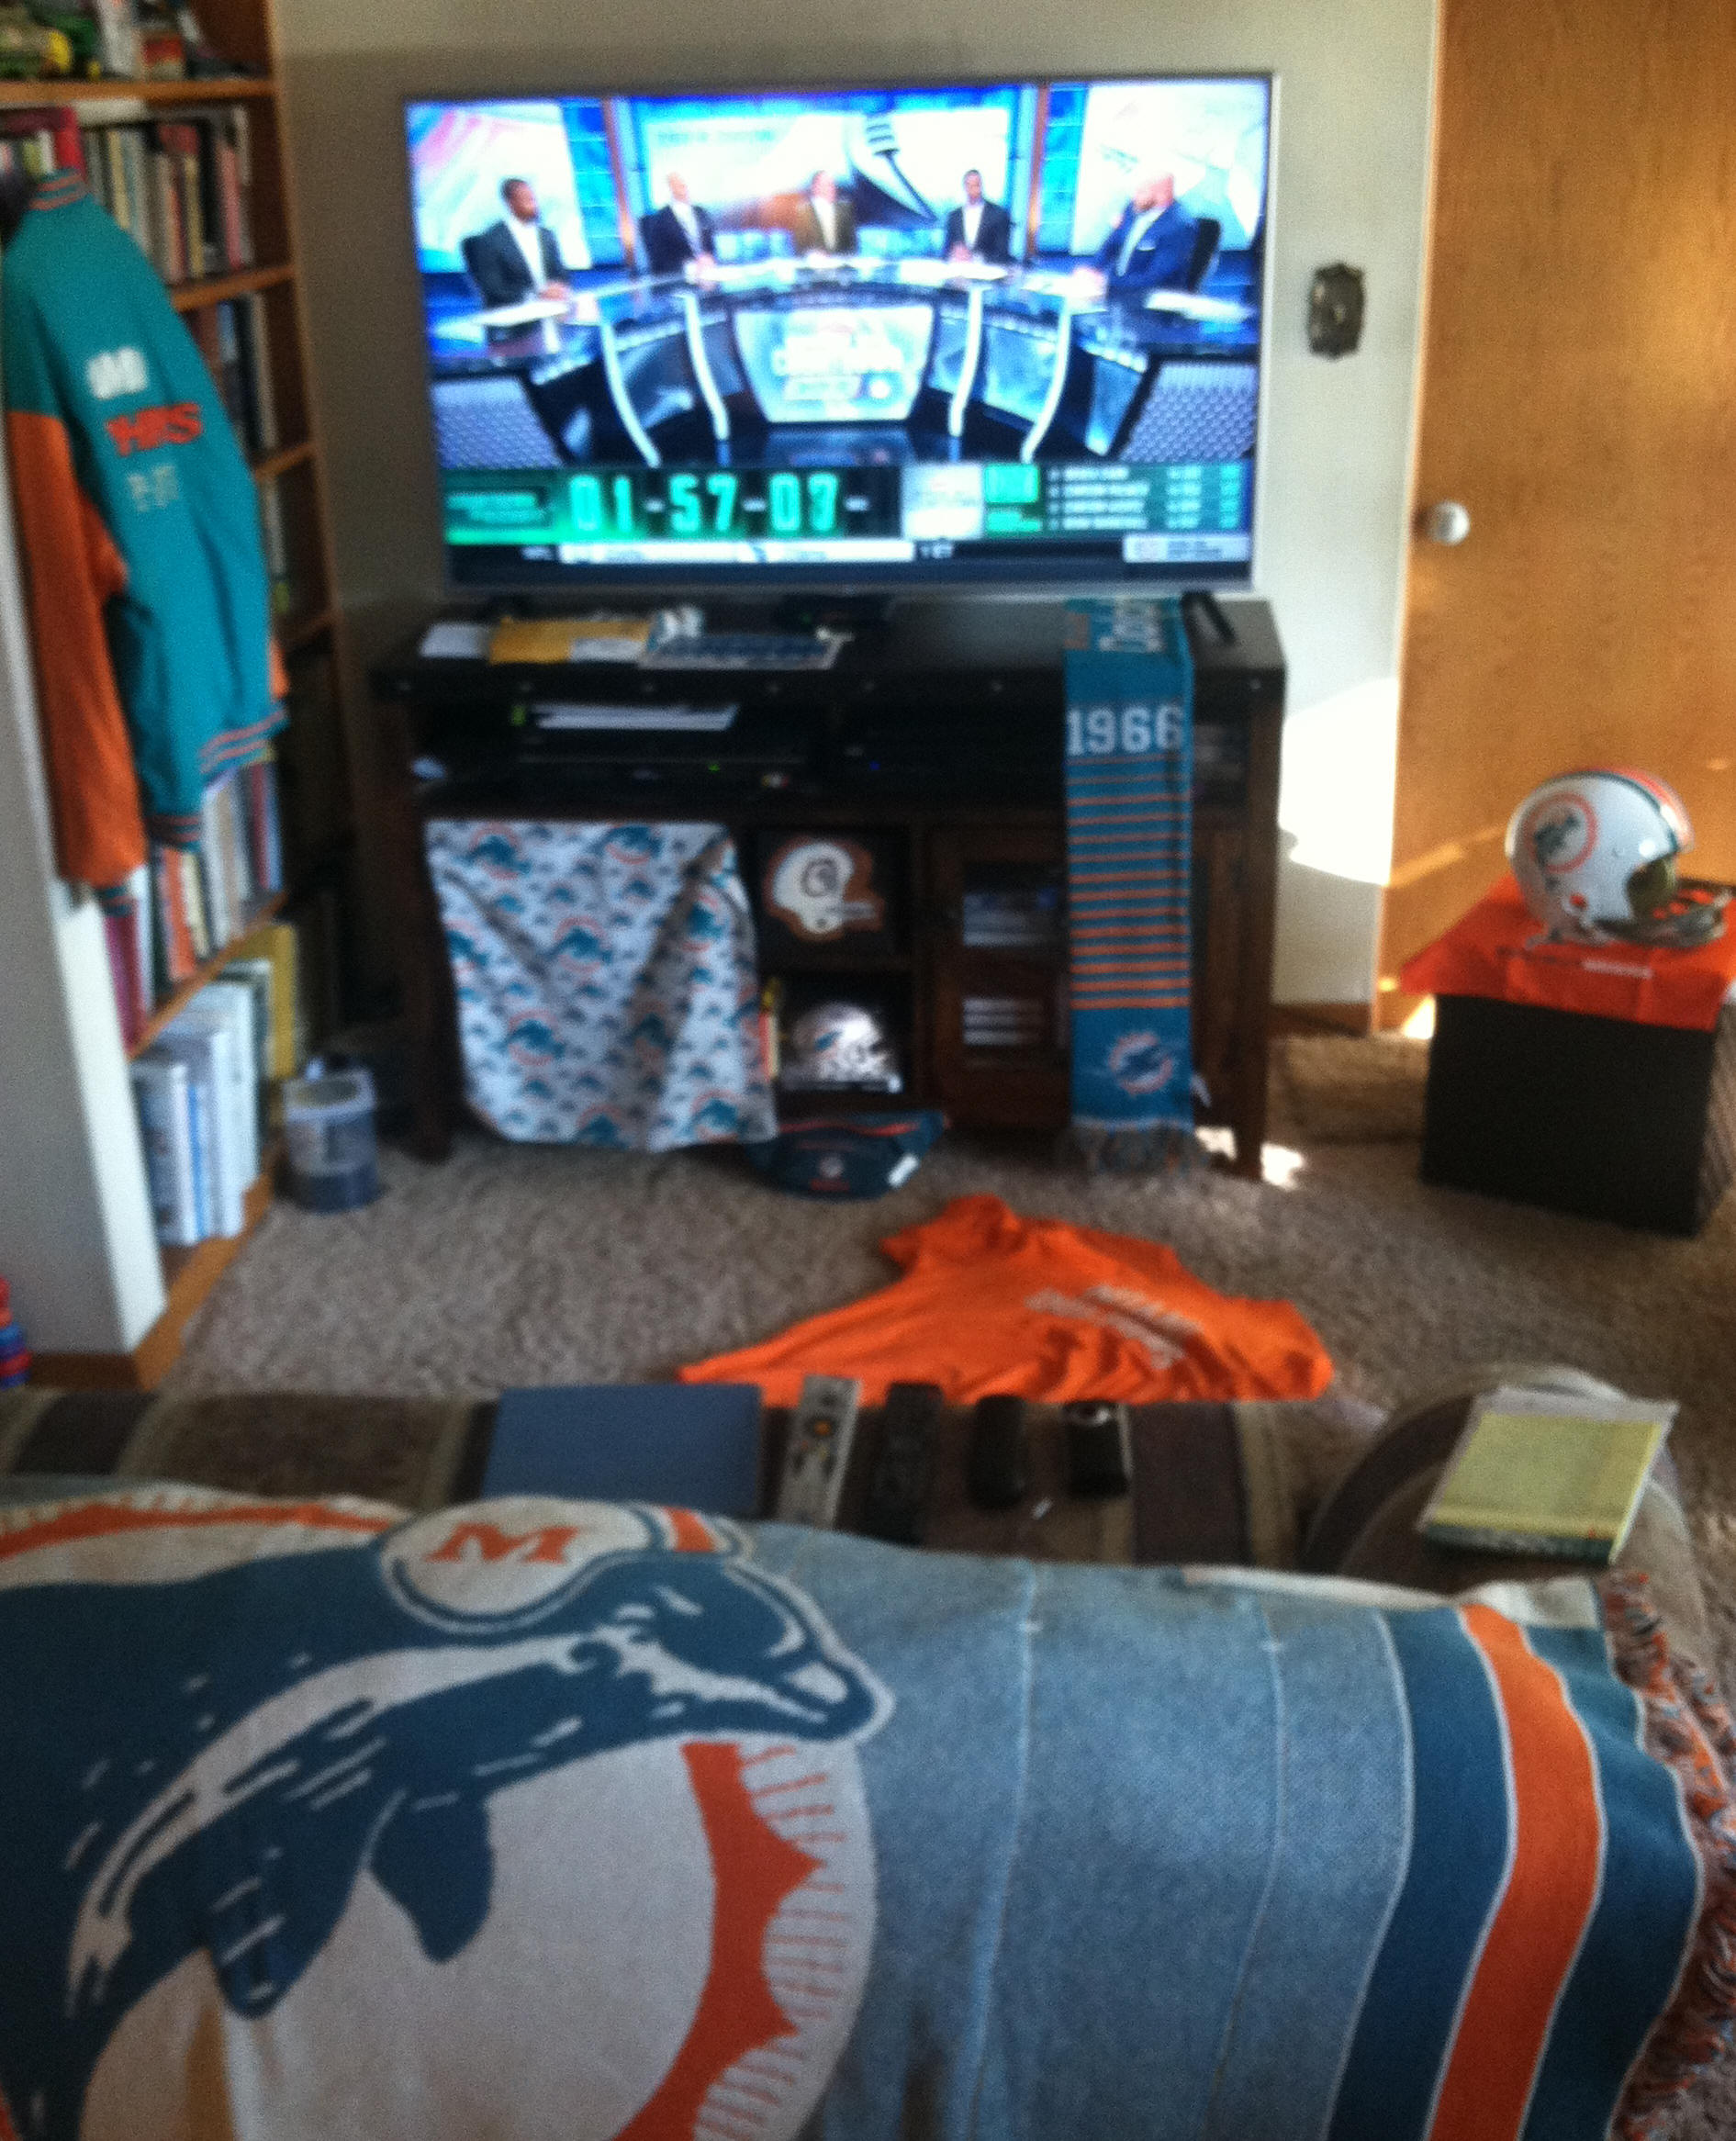 Had the living room set up for FINS 28, Buf 25 on 10-23-16